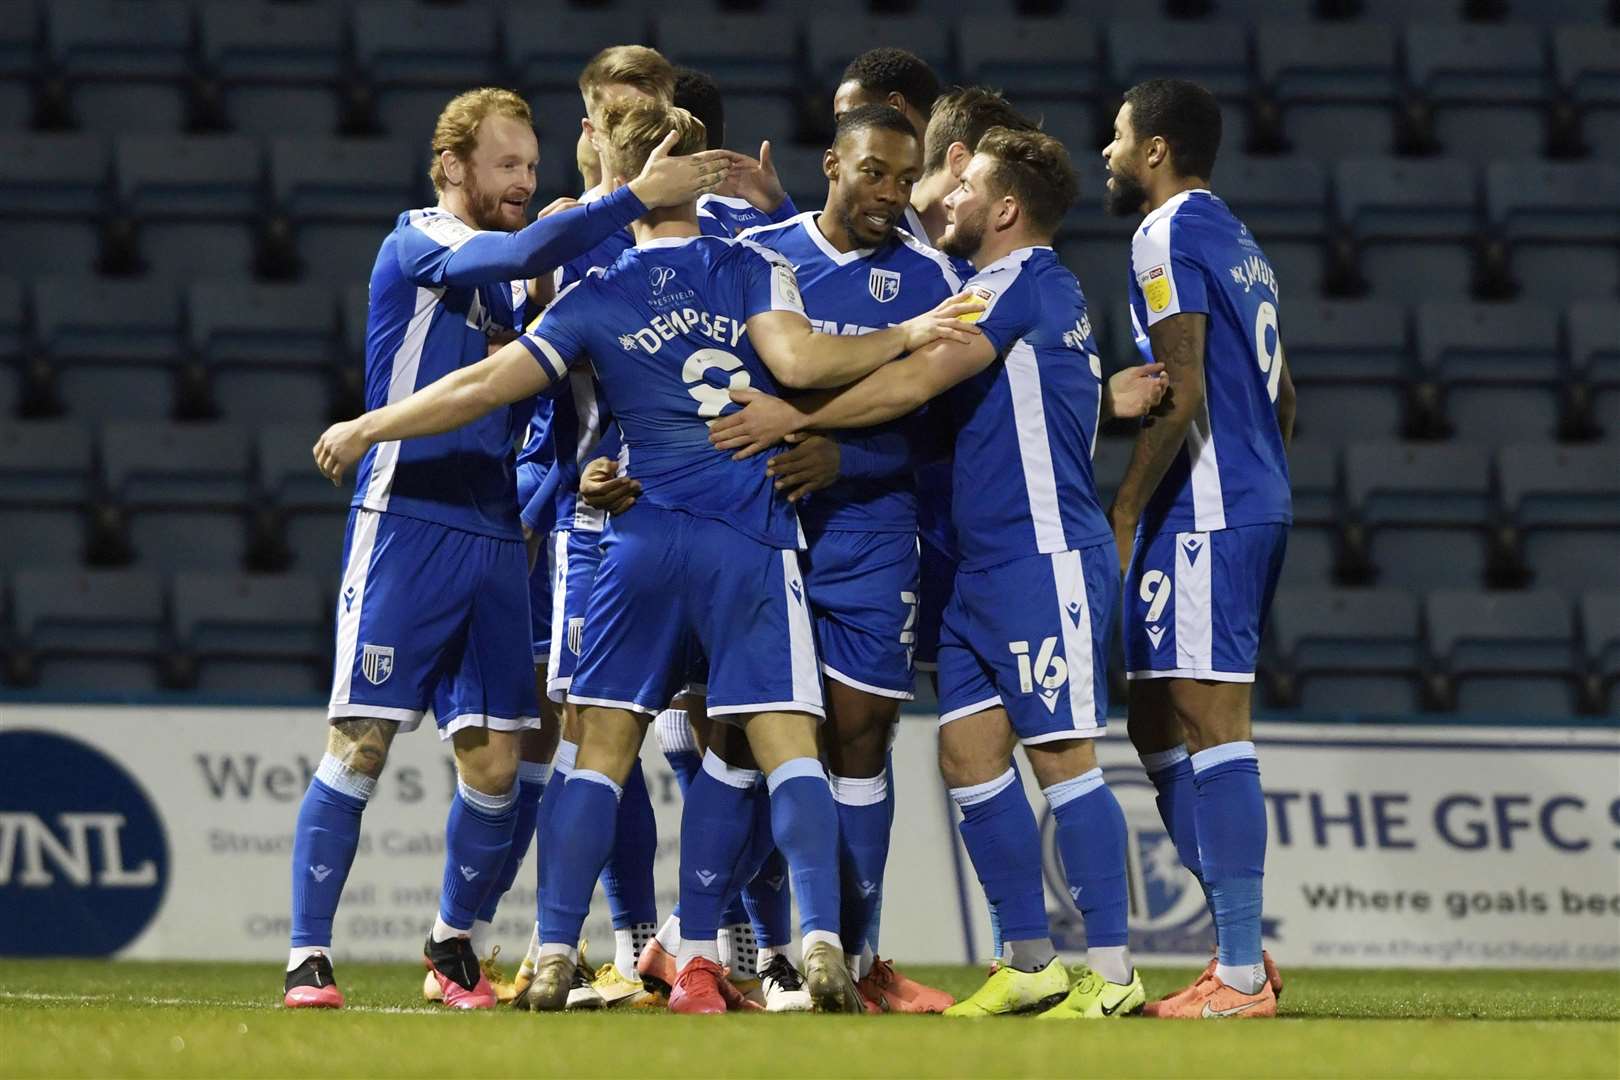 Gillingham players celebrate their opening goal against AFC Wimbledon Picture: Barry Goodwin